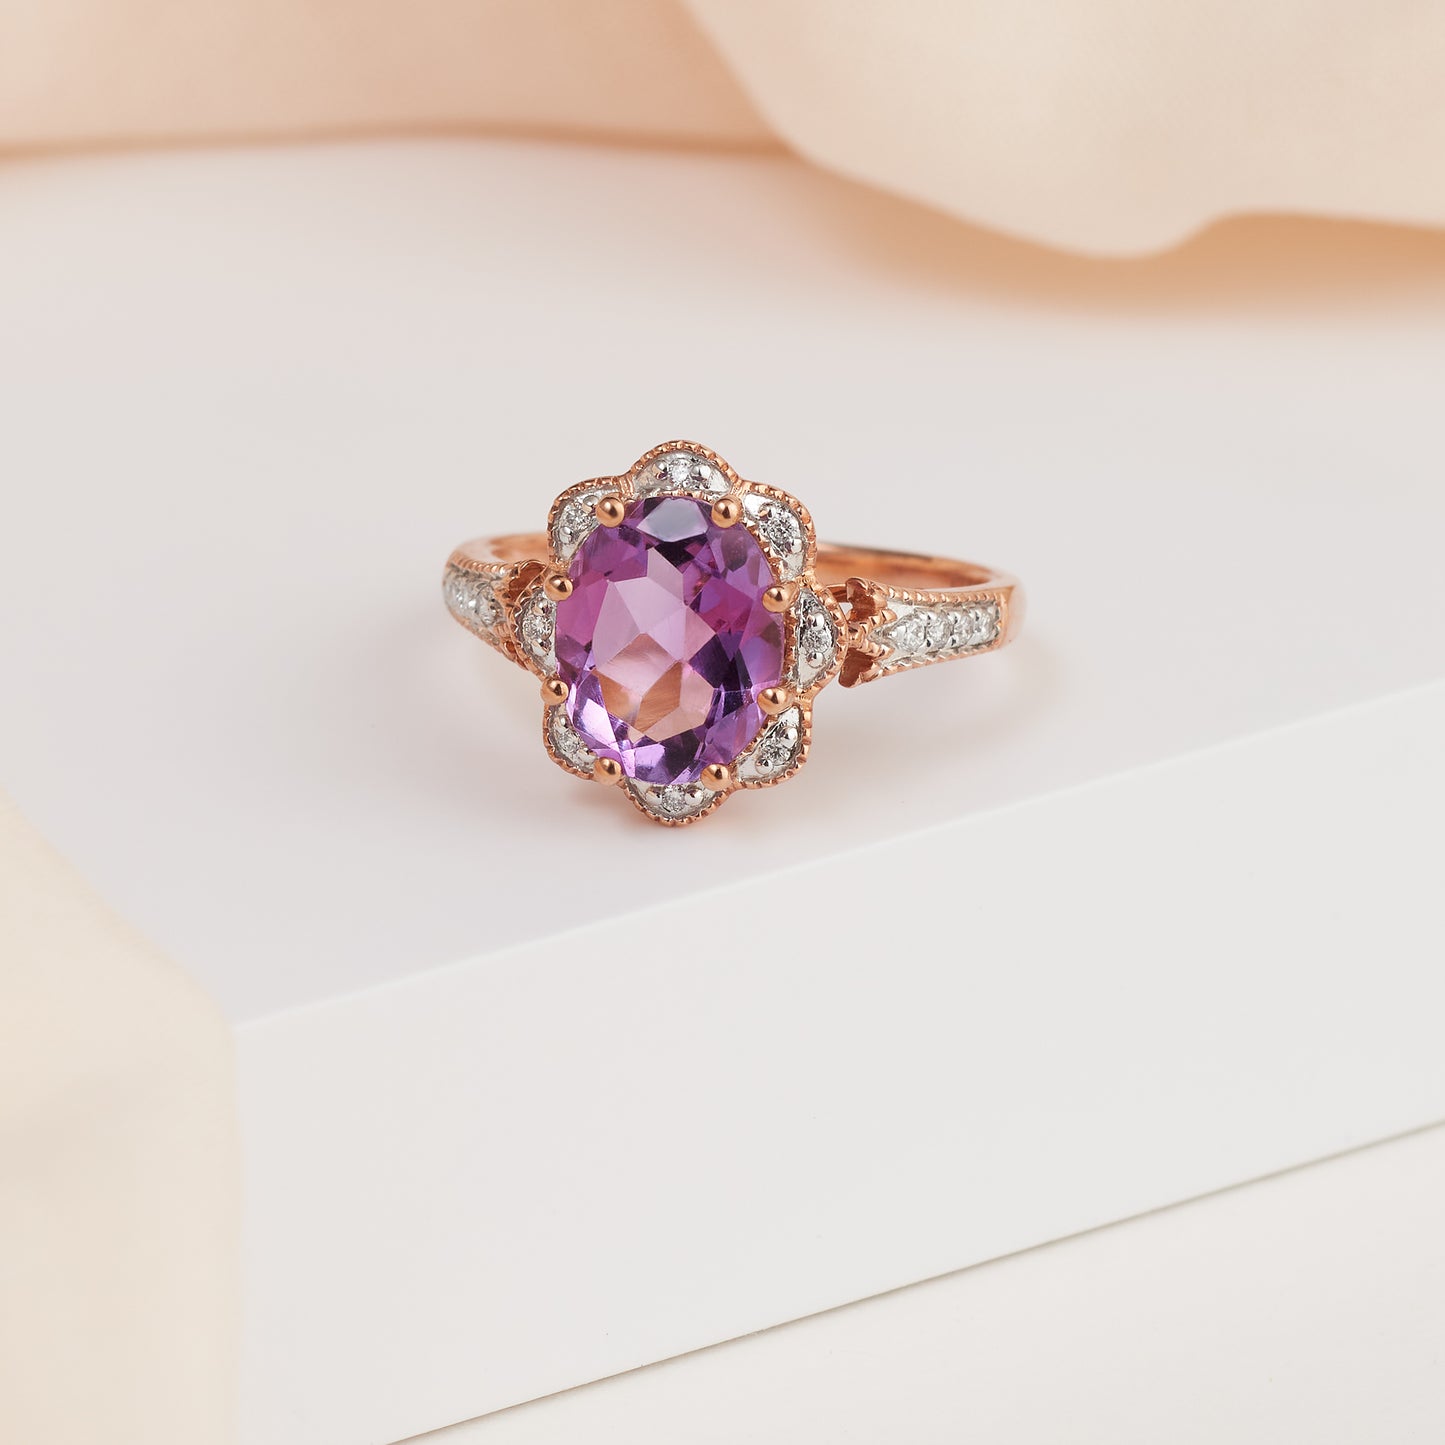 9K Rose Gold 10mm x 8mm Oval Amethyst Diamond Halo Cocktail Ring